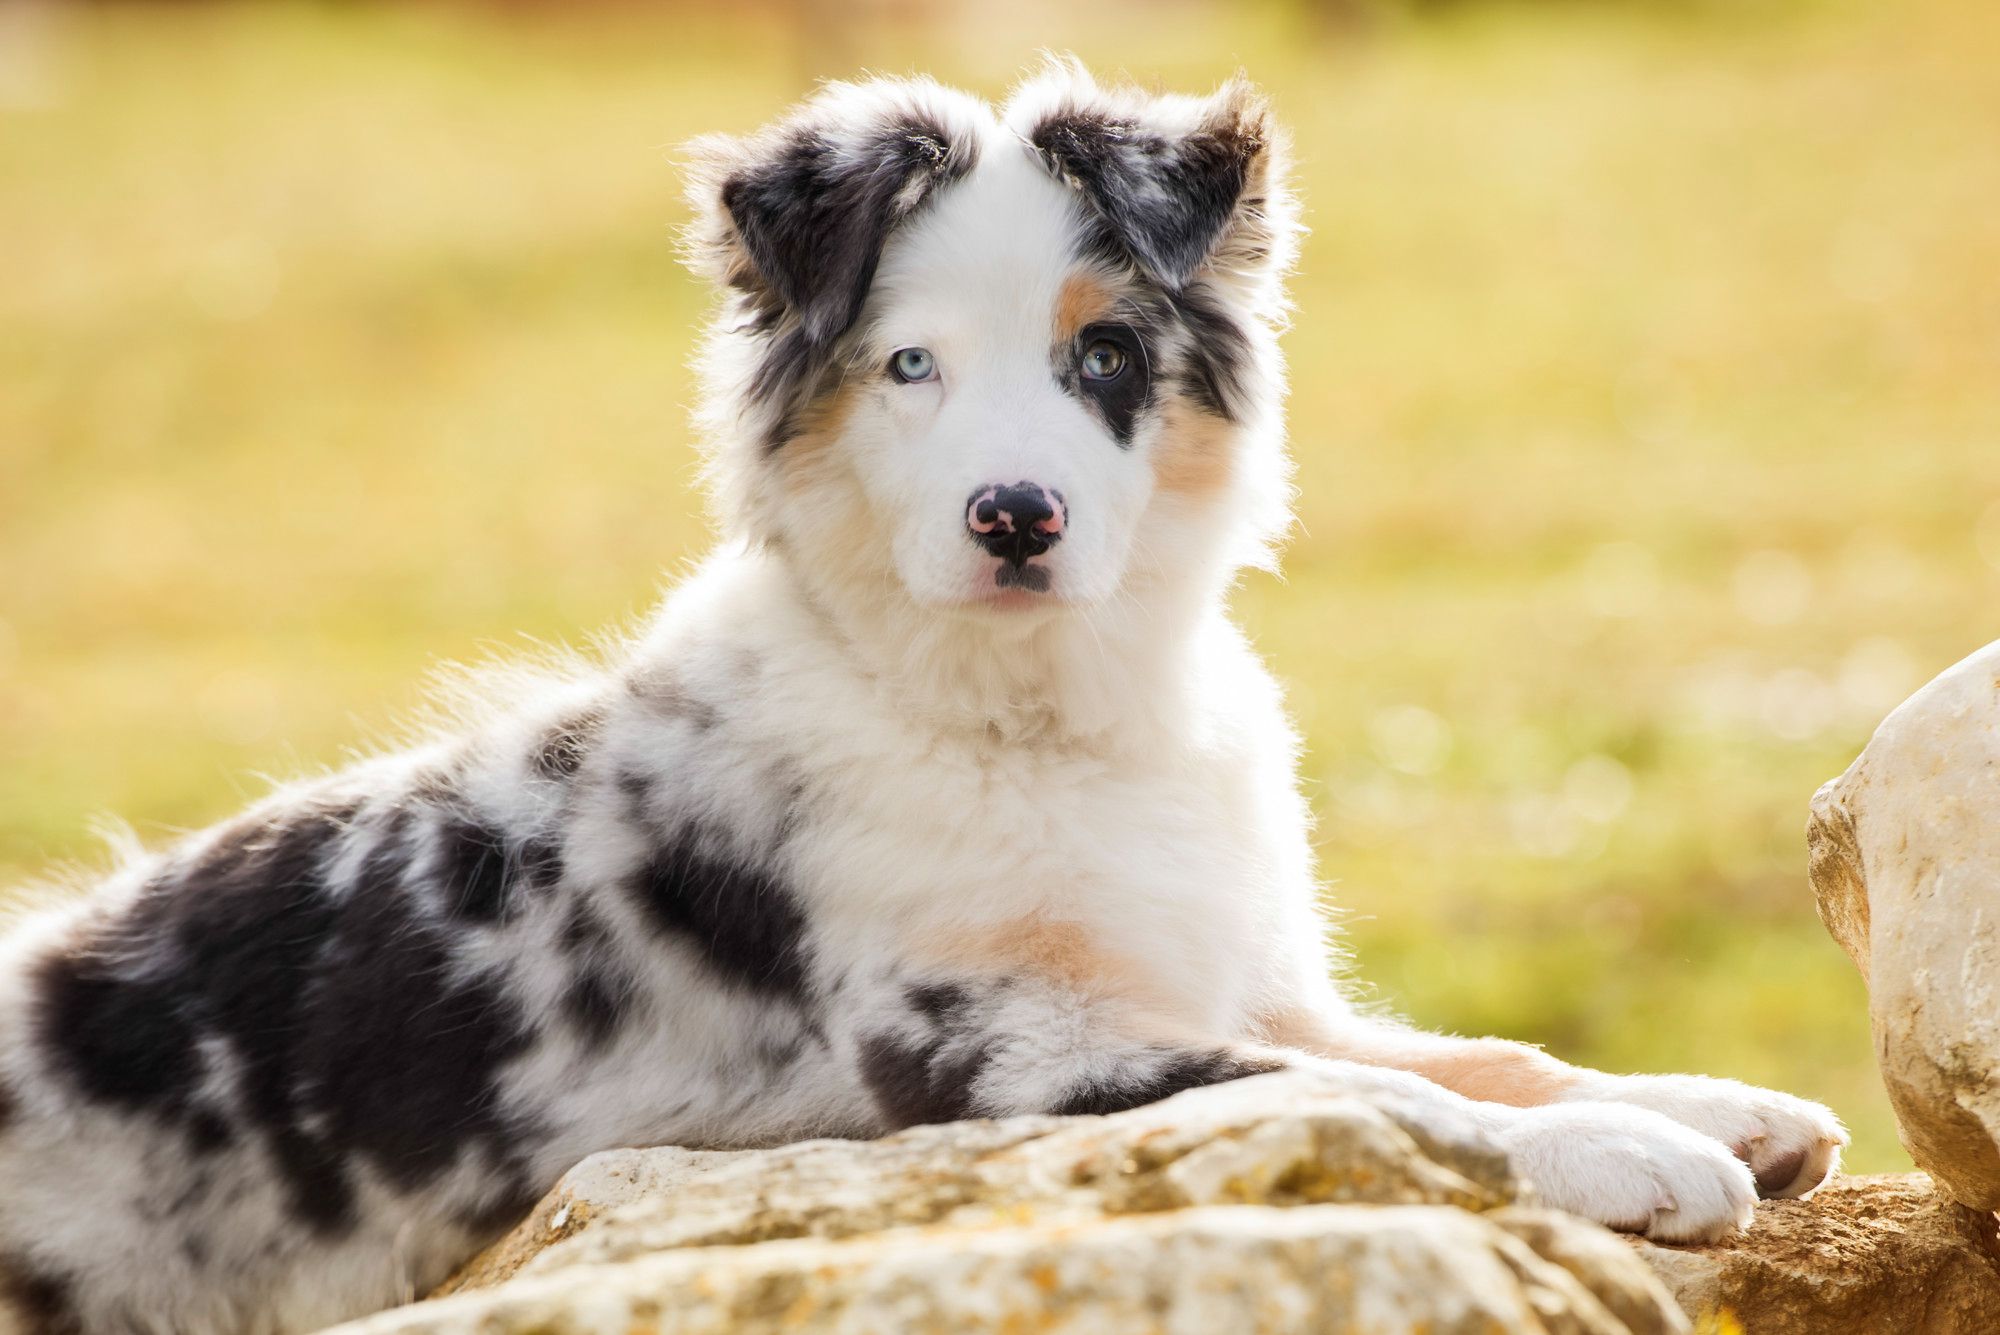 Mini Toy Australian Shepherds: 5 Things Every Owner Should Know